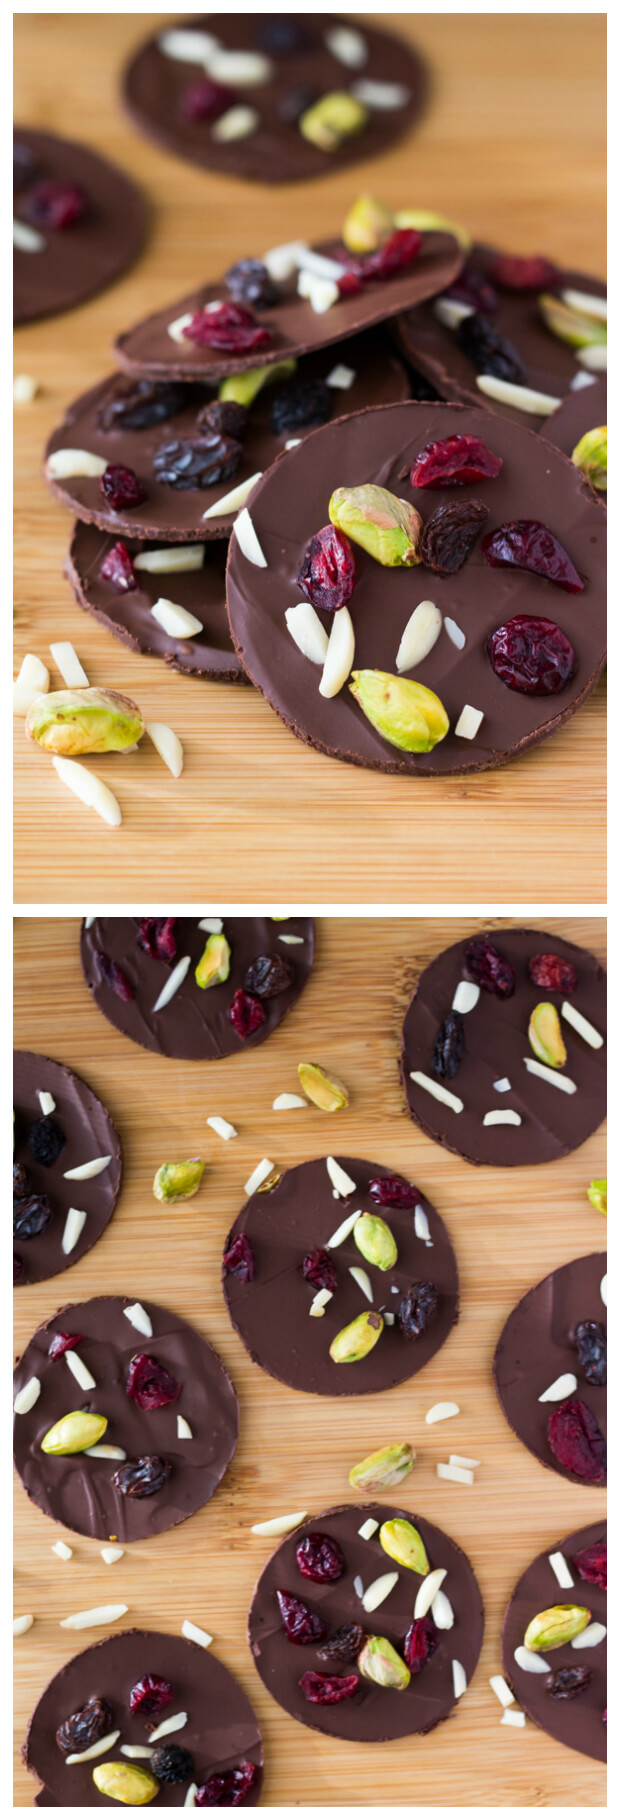 Delicious Dark Chocolate Fruit & Nut Clusters with pistachios, almonds, dried cranberries and raisins. Ready in minutes and so pretty, they make a great gift too!